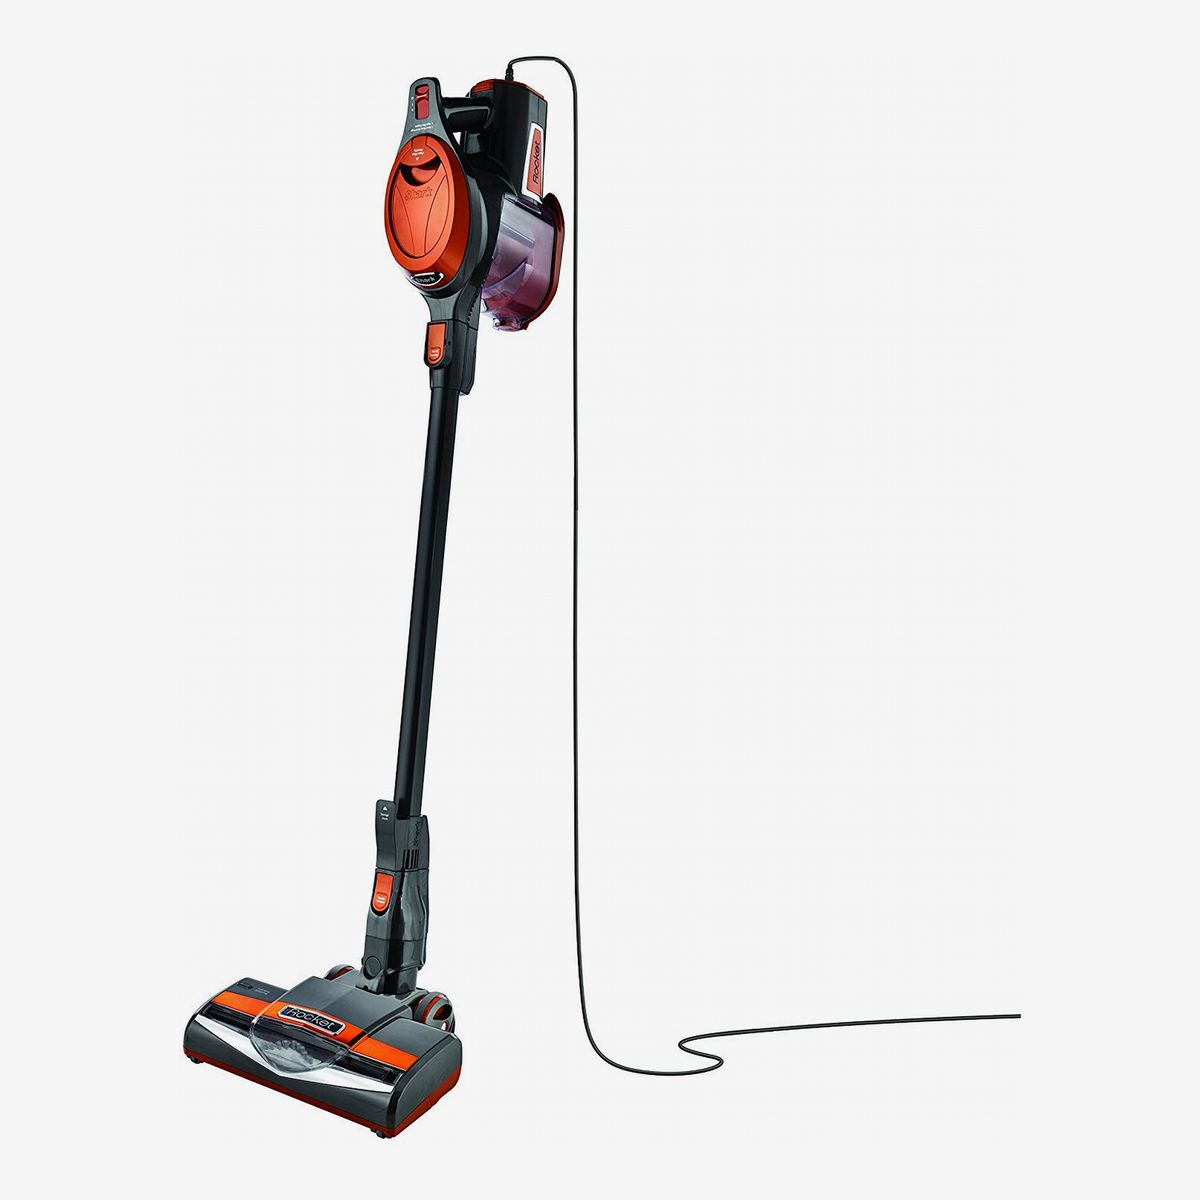 18 Best Vacuums For Pet Hair 2021 The, Best Vacuum For Hardwood Floors With Pets